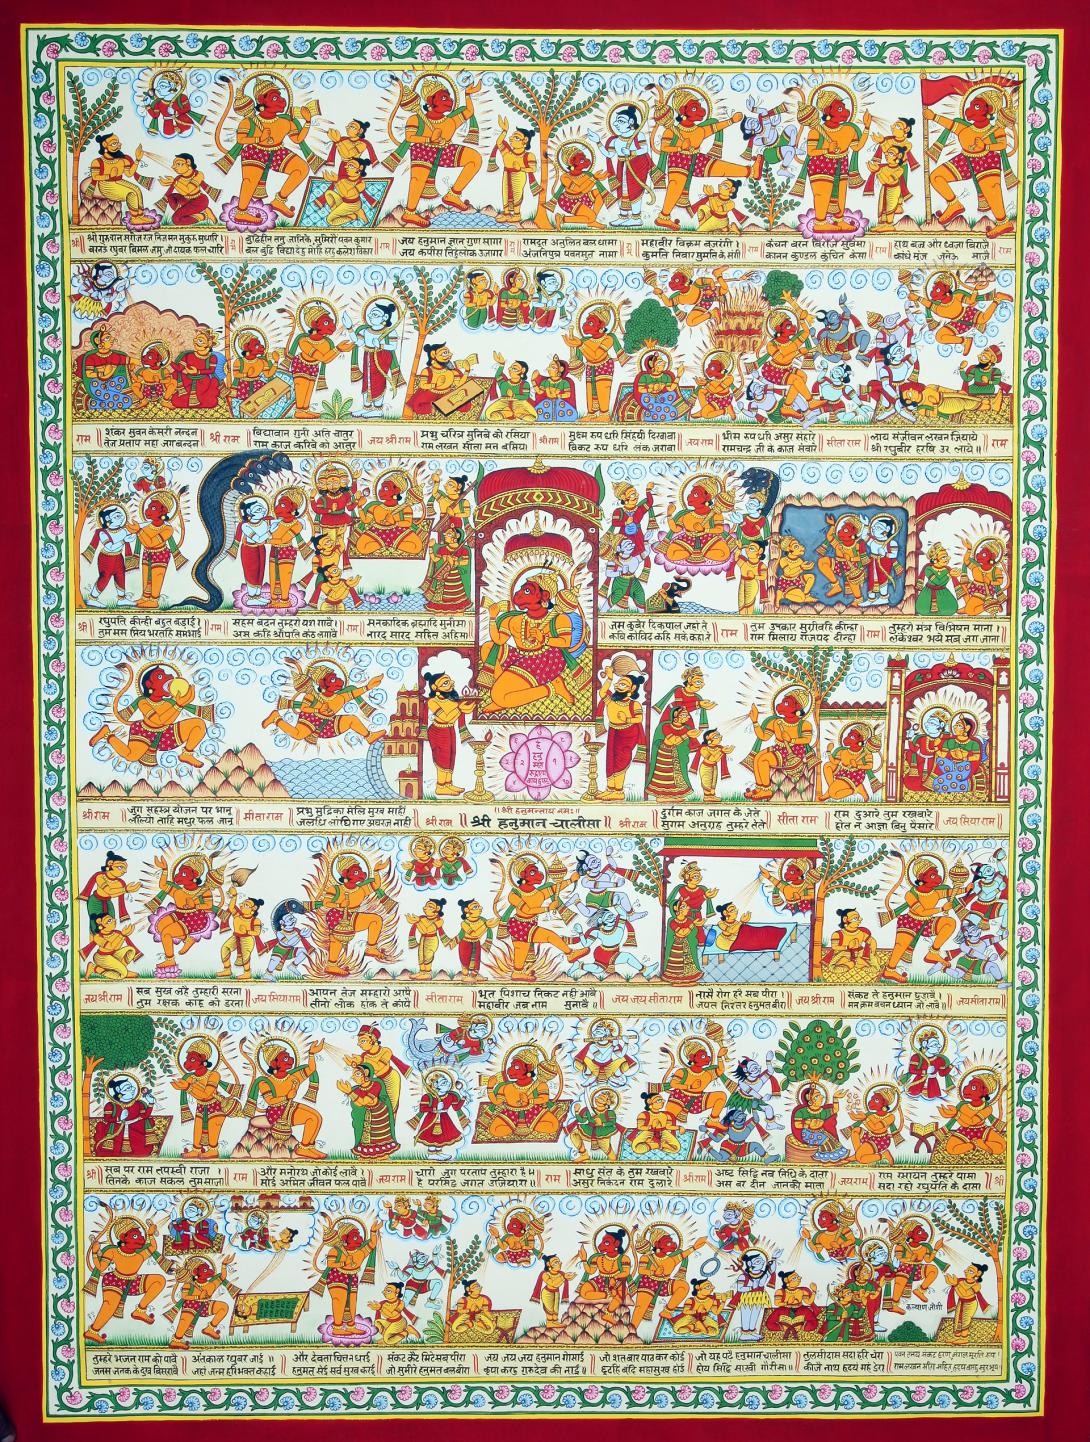 A painted scroll with many elaborate narrative illustrations.